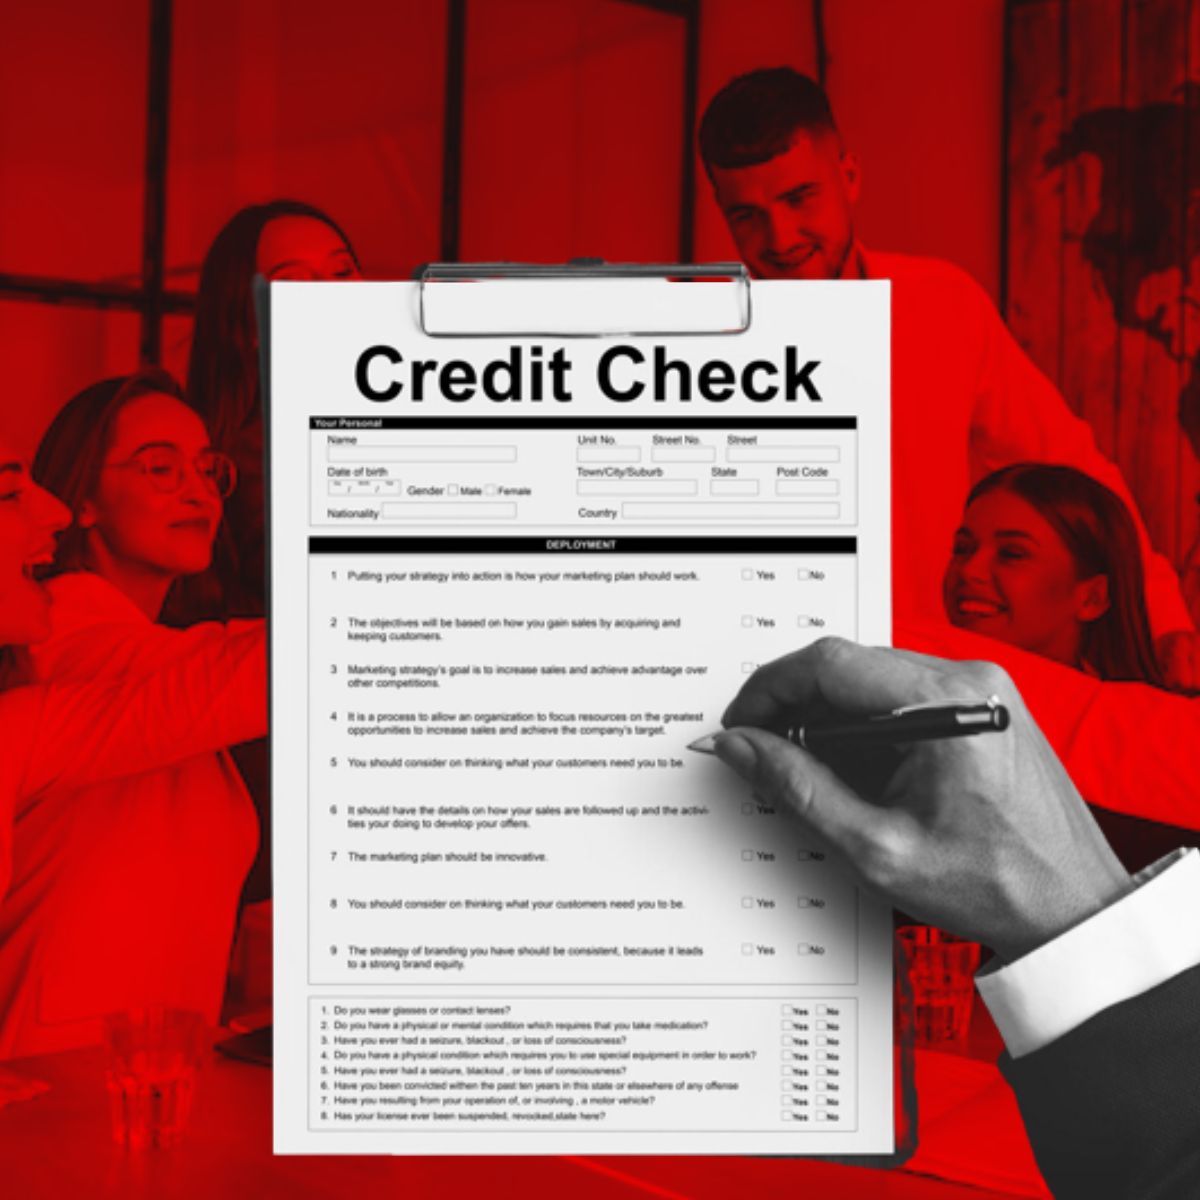 Company Credit Checks: Why they are useful for your company